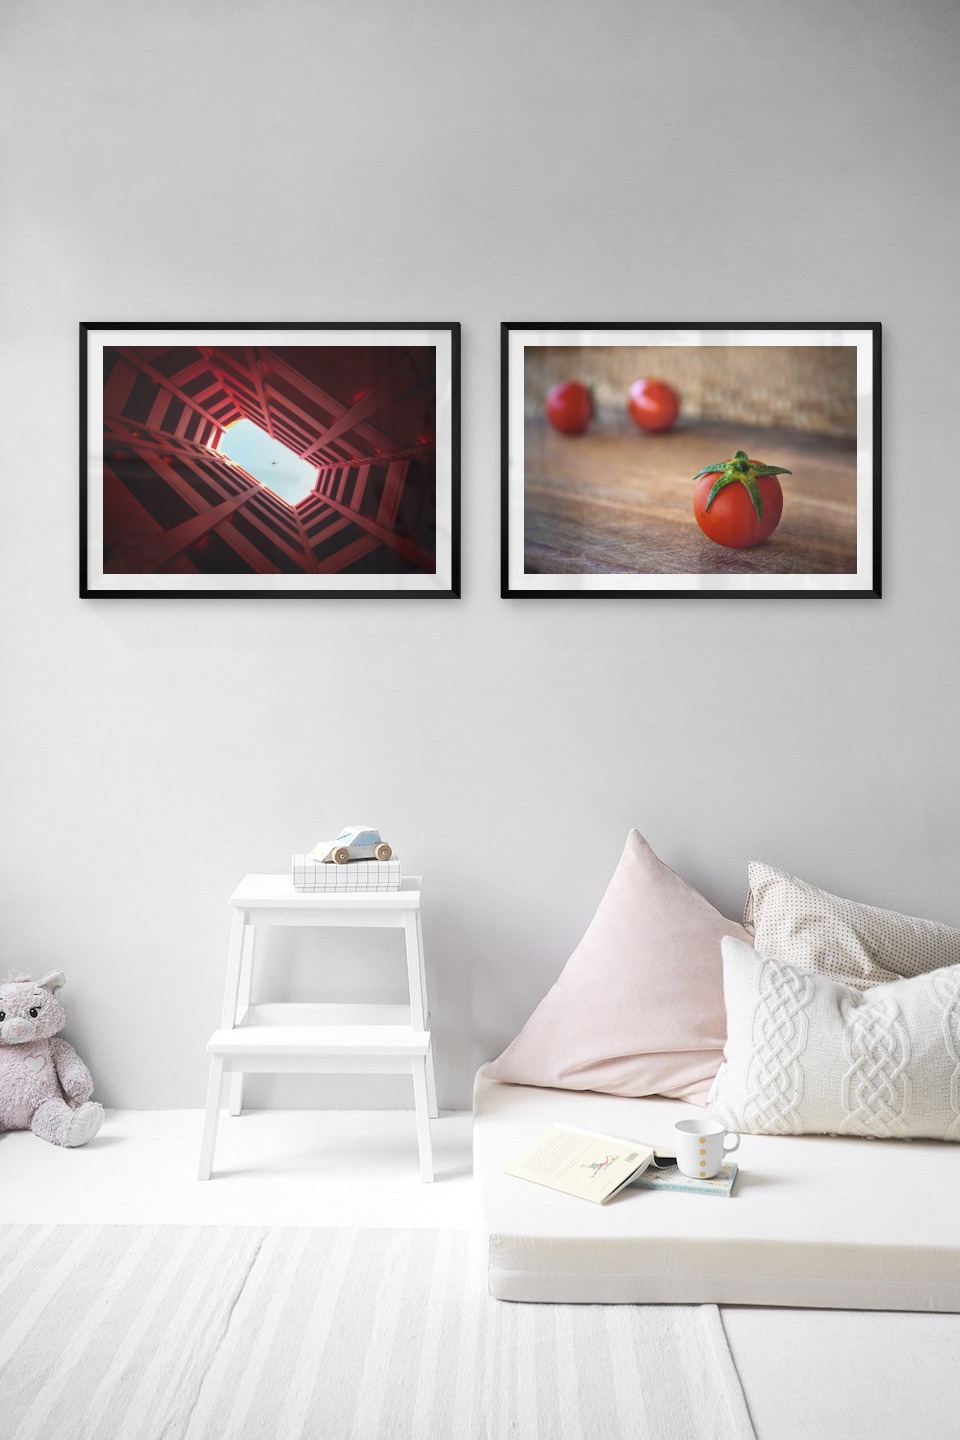 Gallery wall with picture frames in black in sizes 50x70 with prints "Airplane above building" and "Tomatoes"